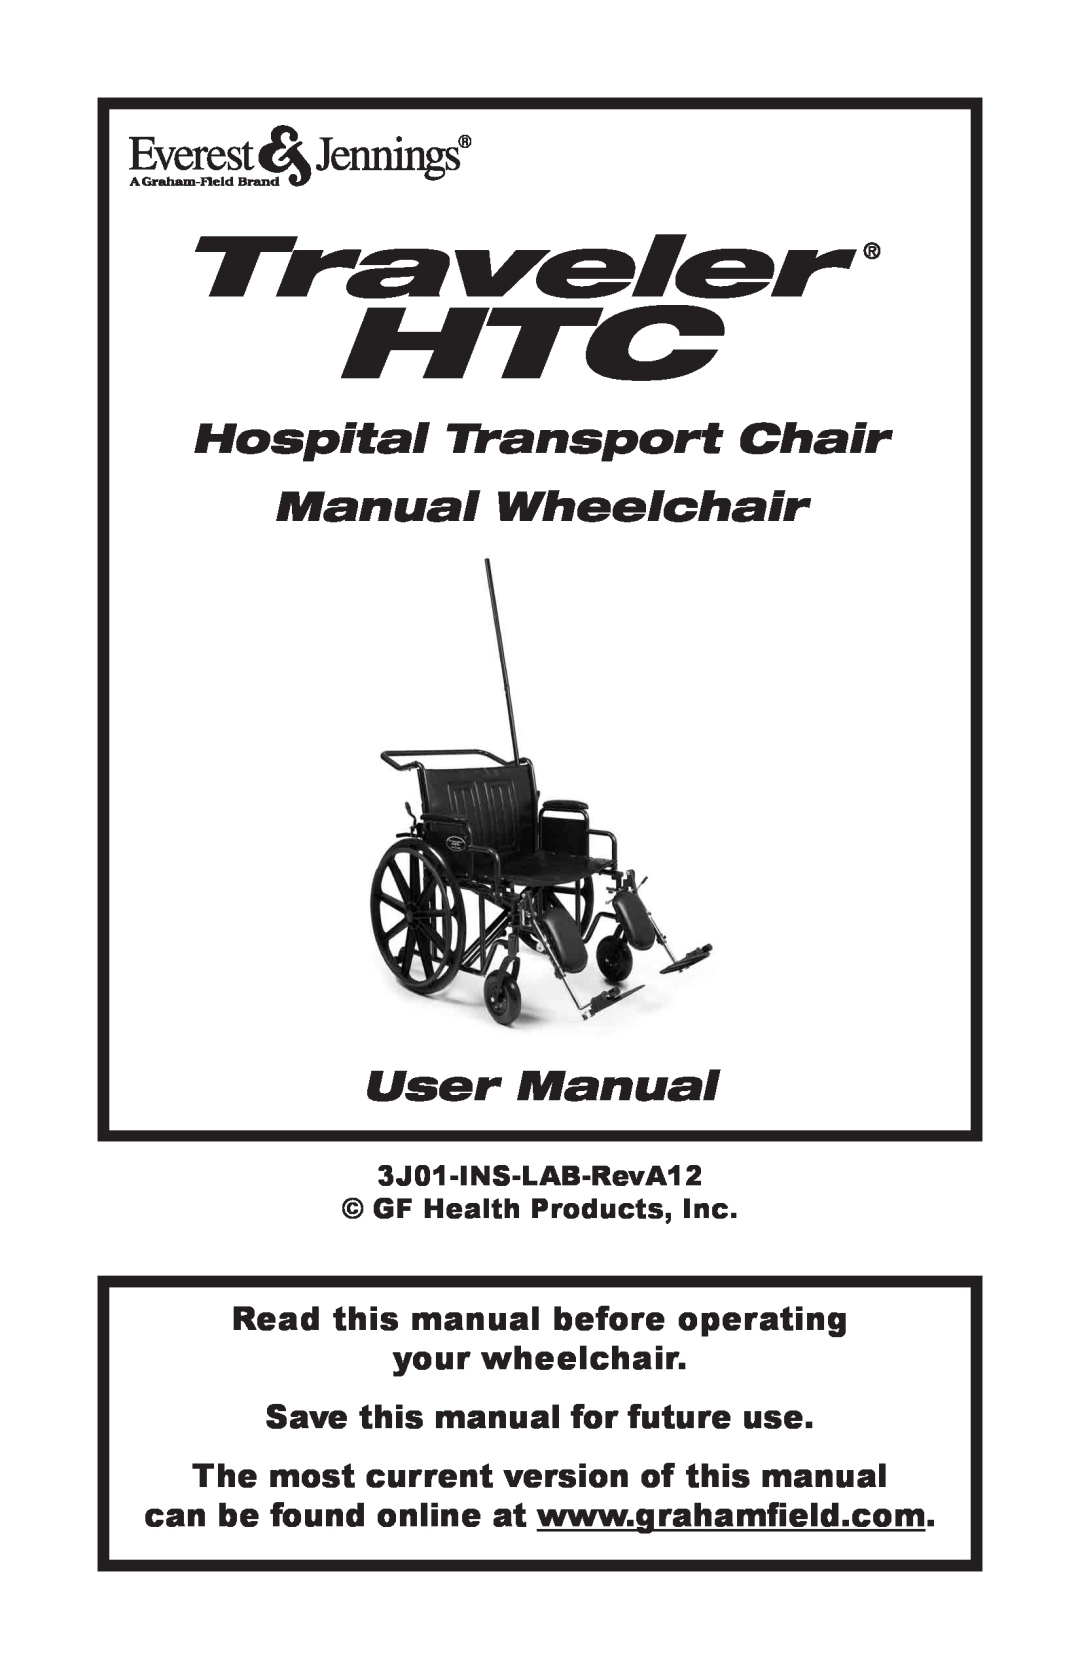 E&J Traveler HTC manual Read this manual before operating your wheelchair, Save this manual for future use 